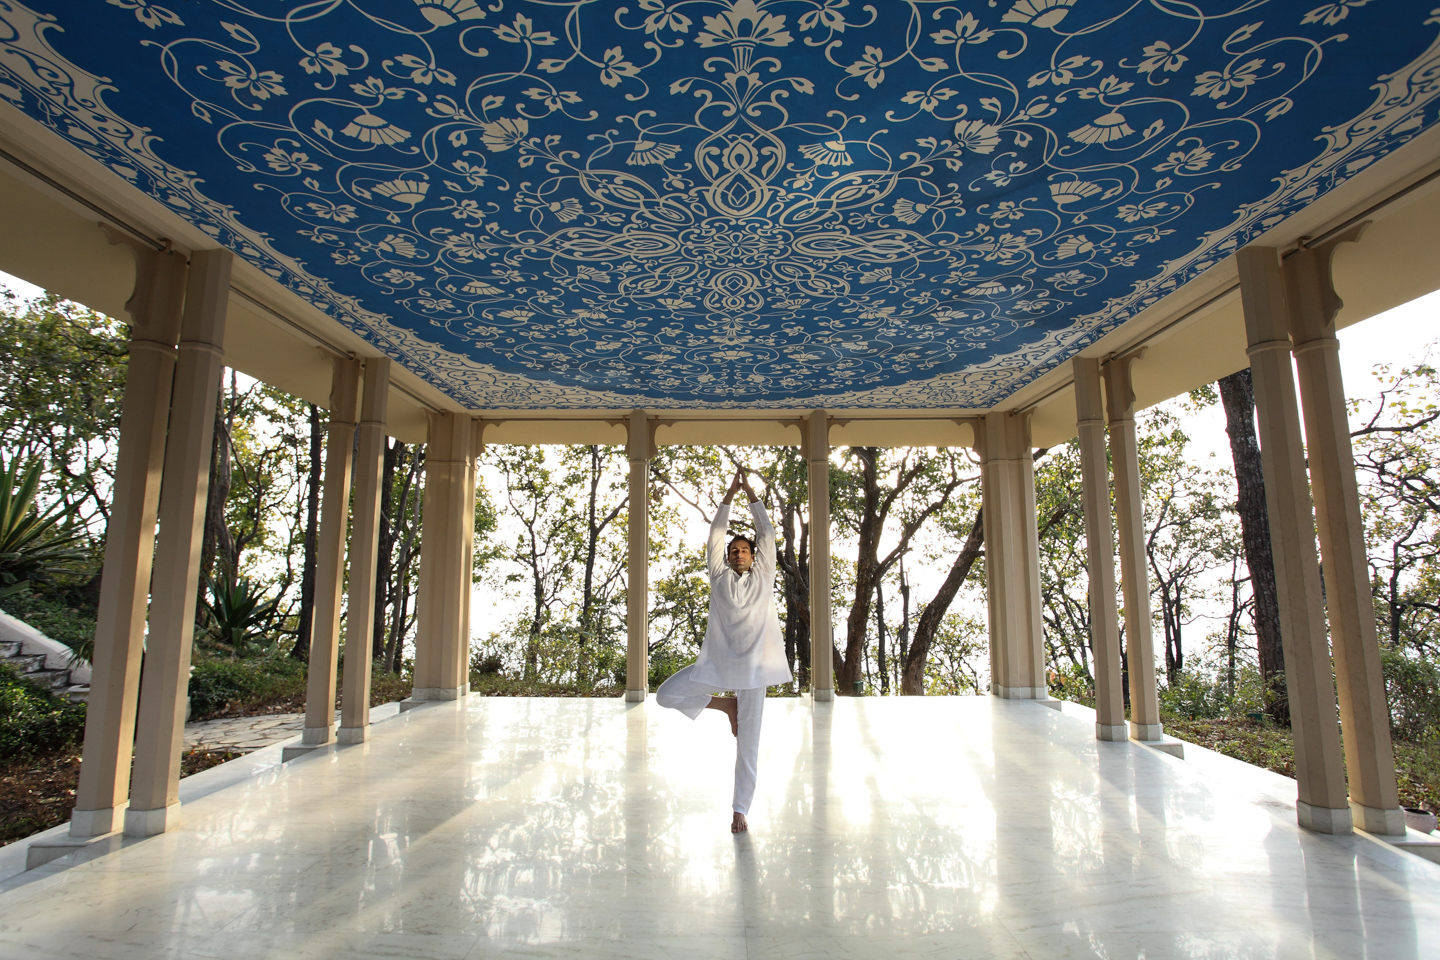 A man performing yoga in the pavilion.